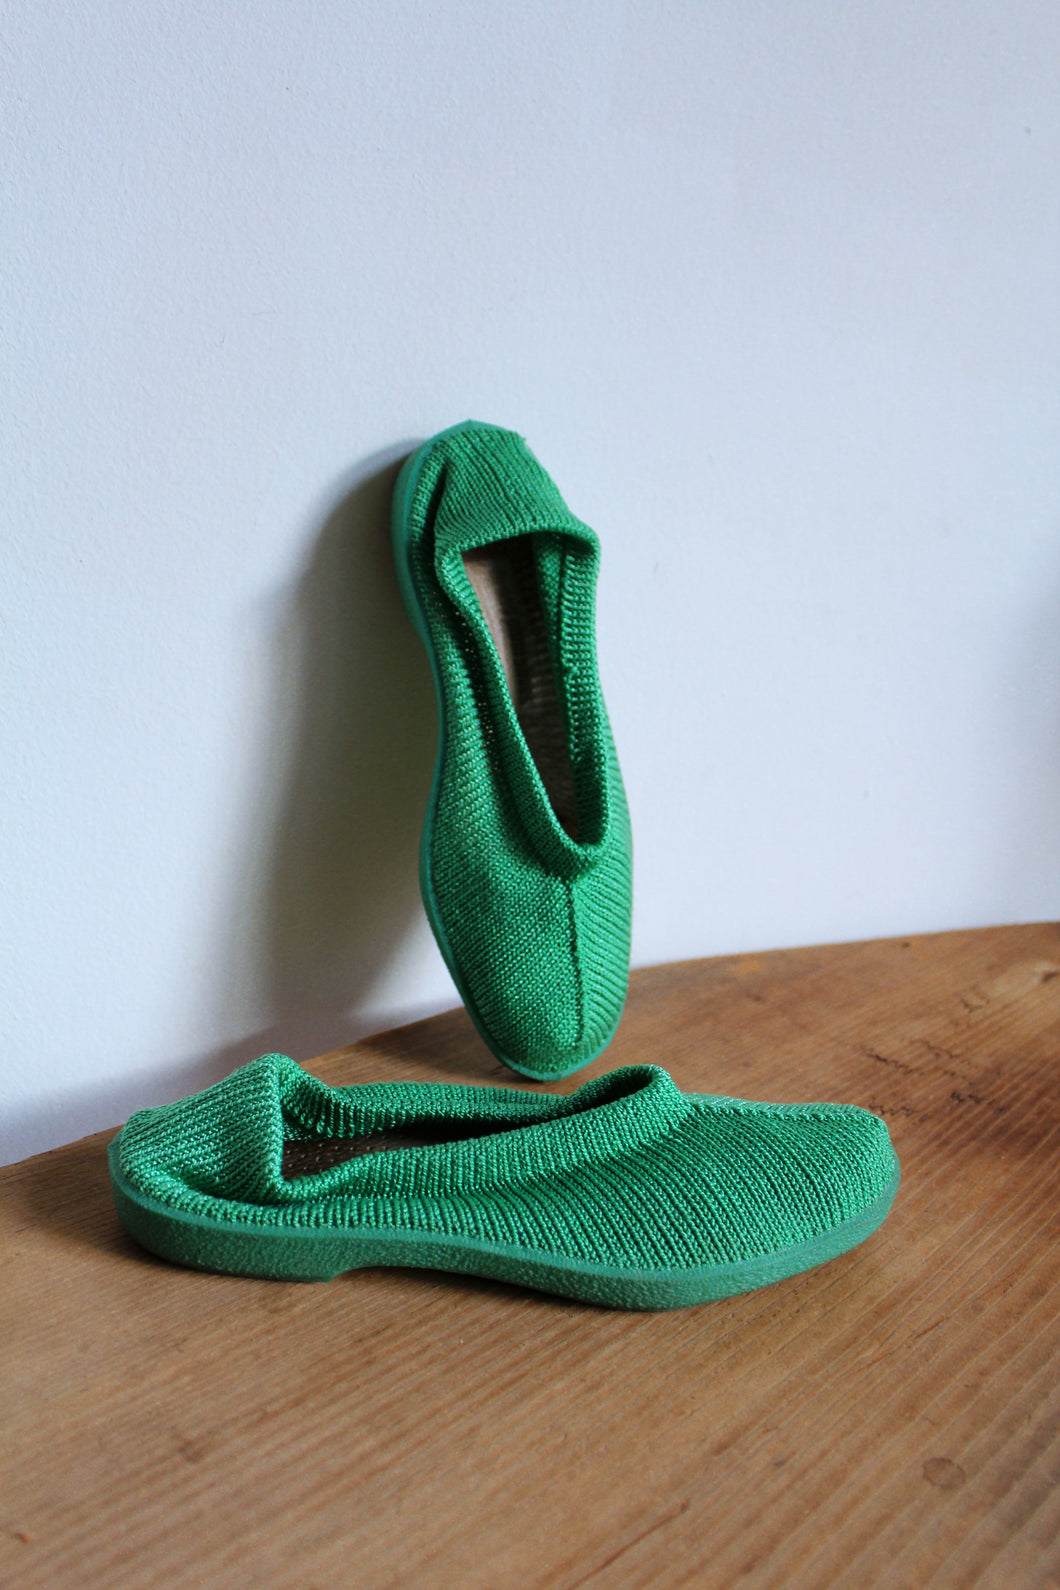 1990s Green Knit Slip On Rubber Shoes - Size 8